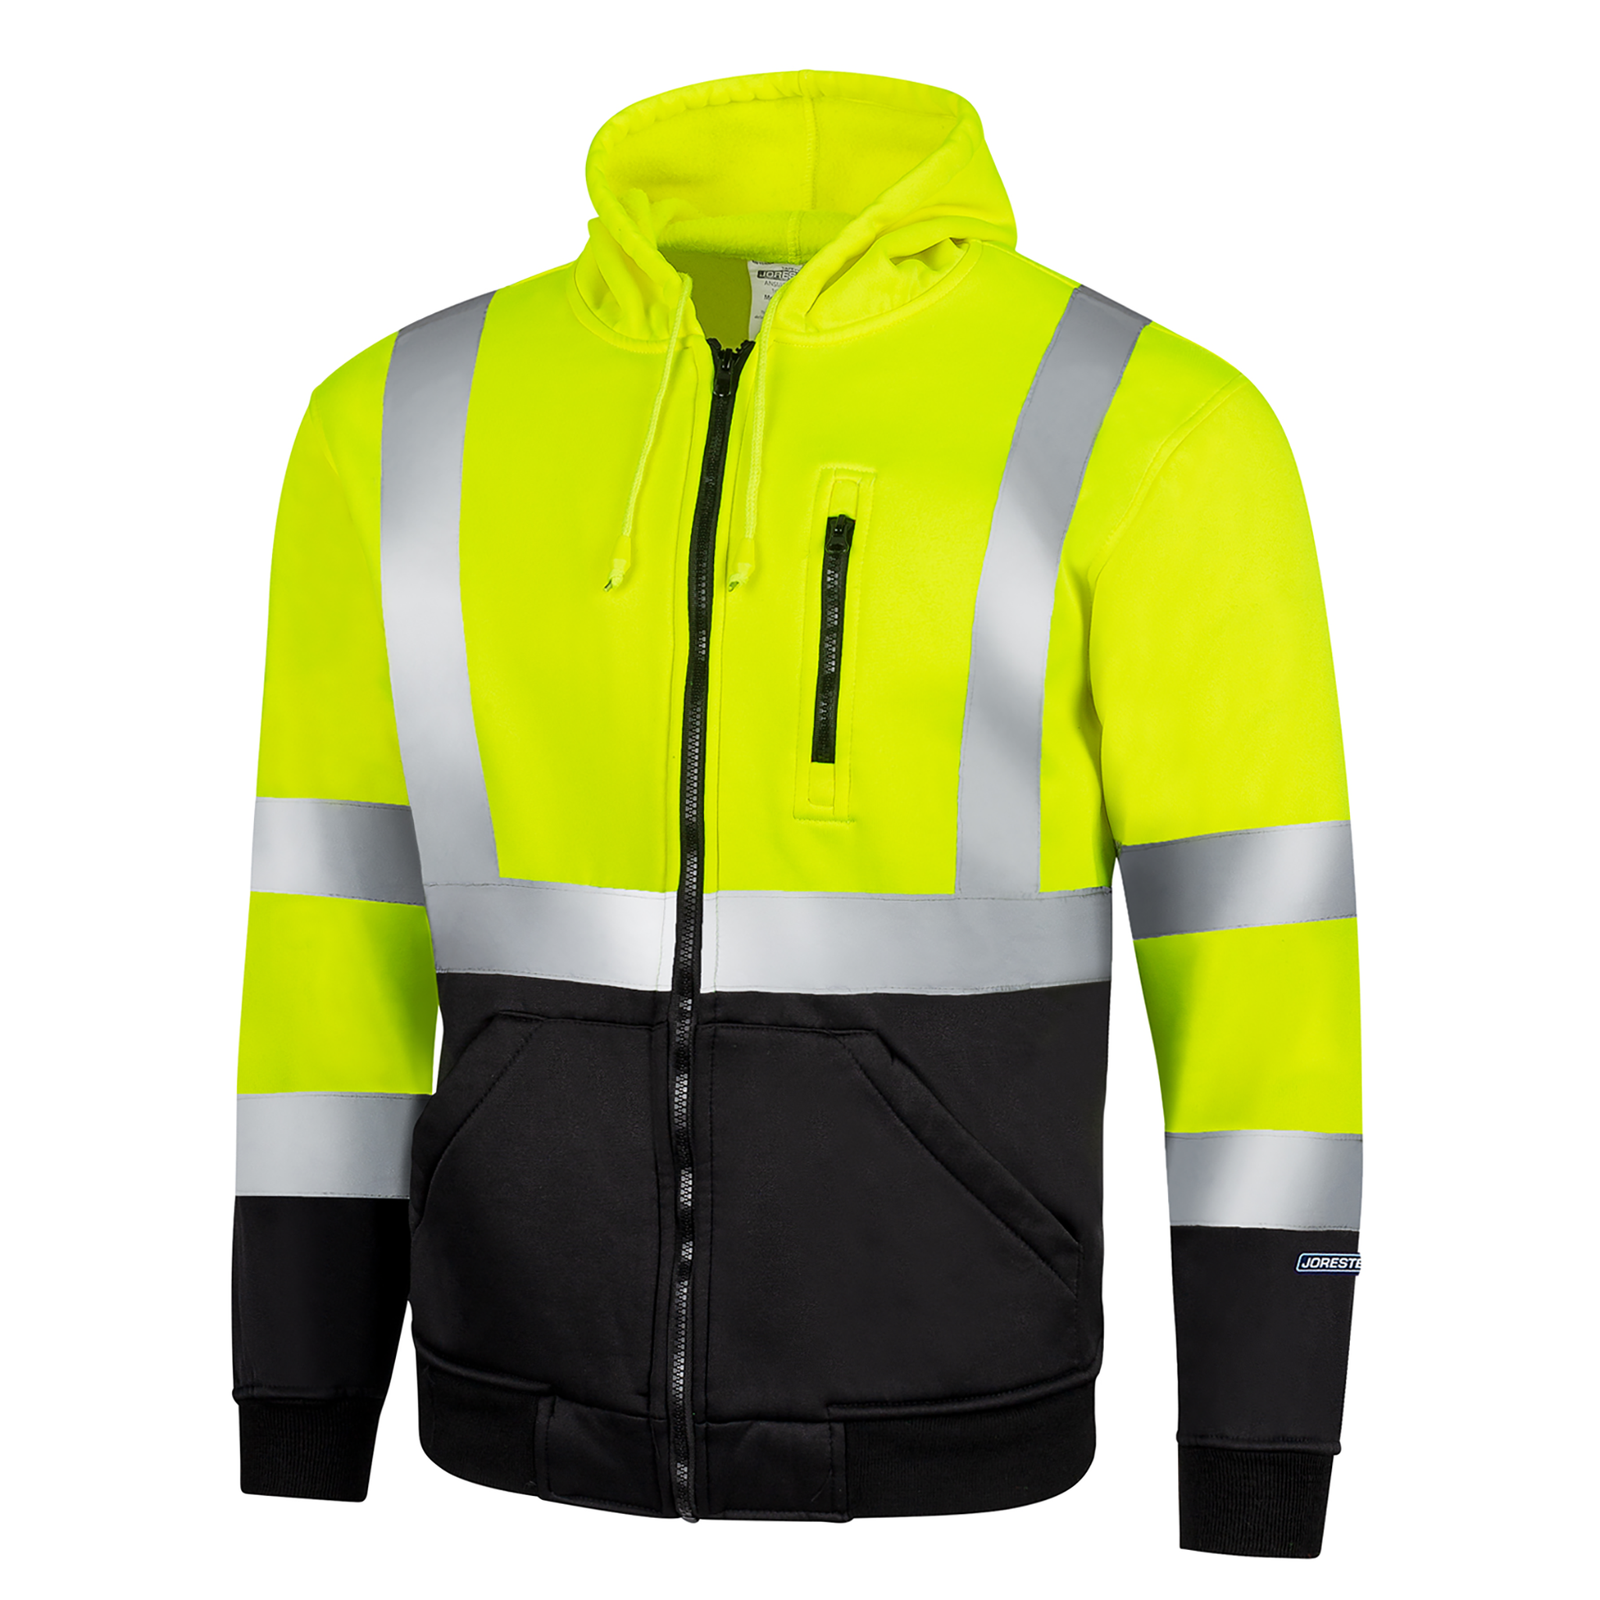 Diagonal view of the JORESTECH hi-vis safety hooded yellow and black sweatshirt with reflective stripes